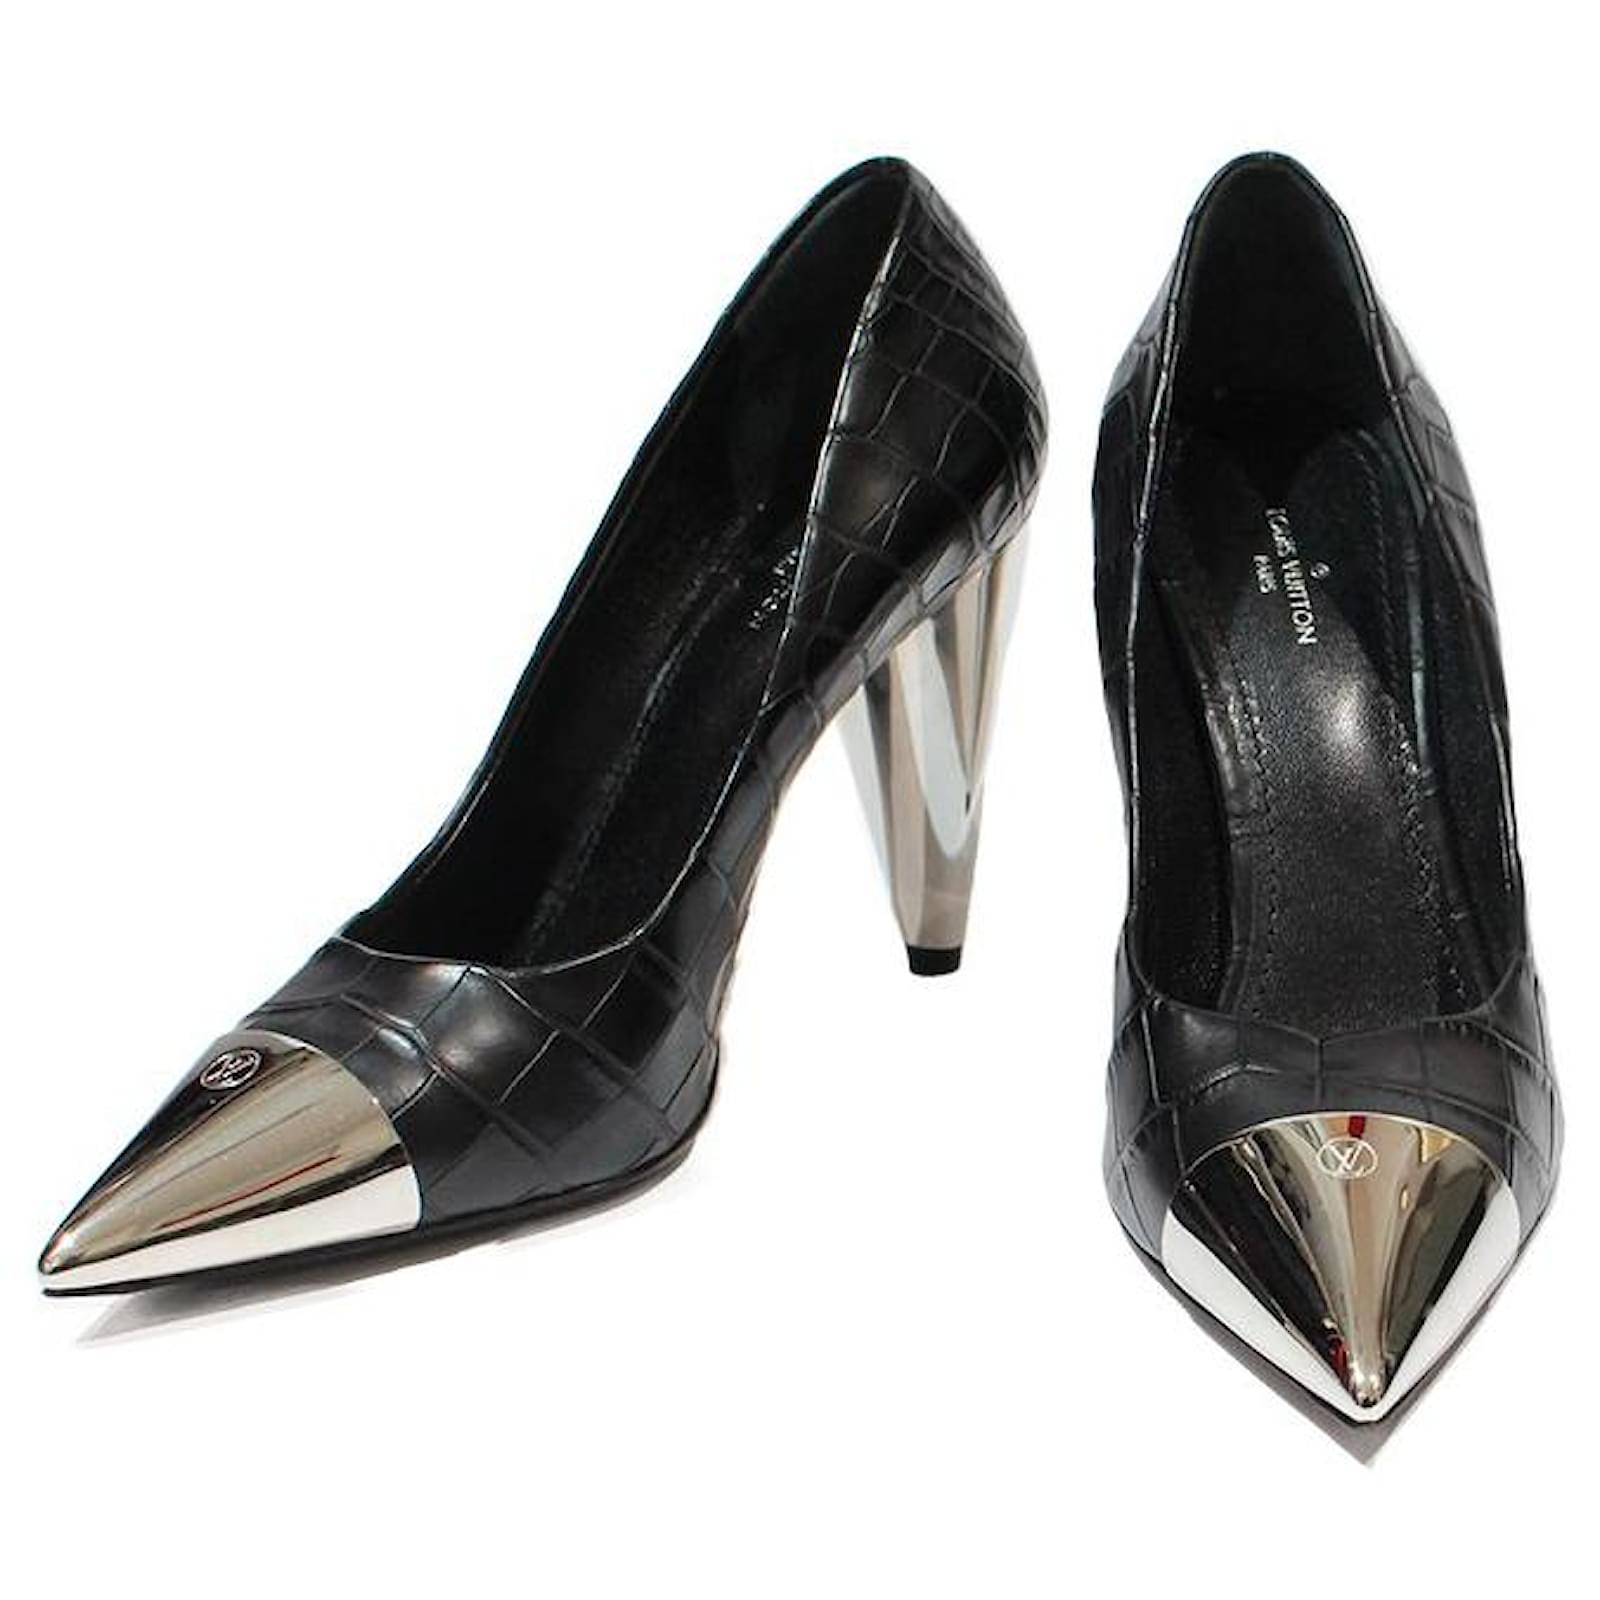 Leather heels Louis Vuitton Black size 38.5 IT in Leather - 28995934